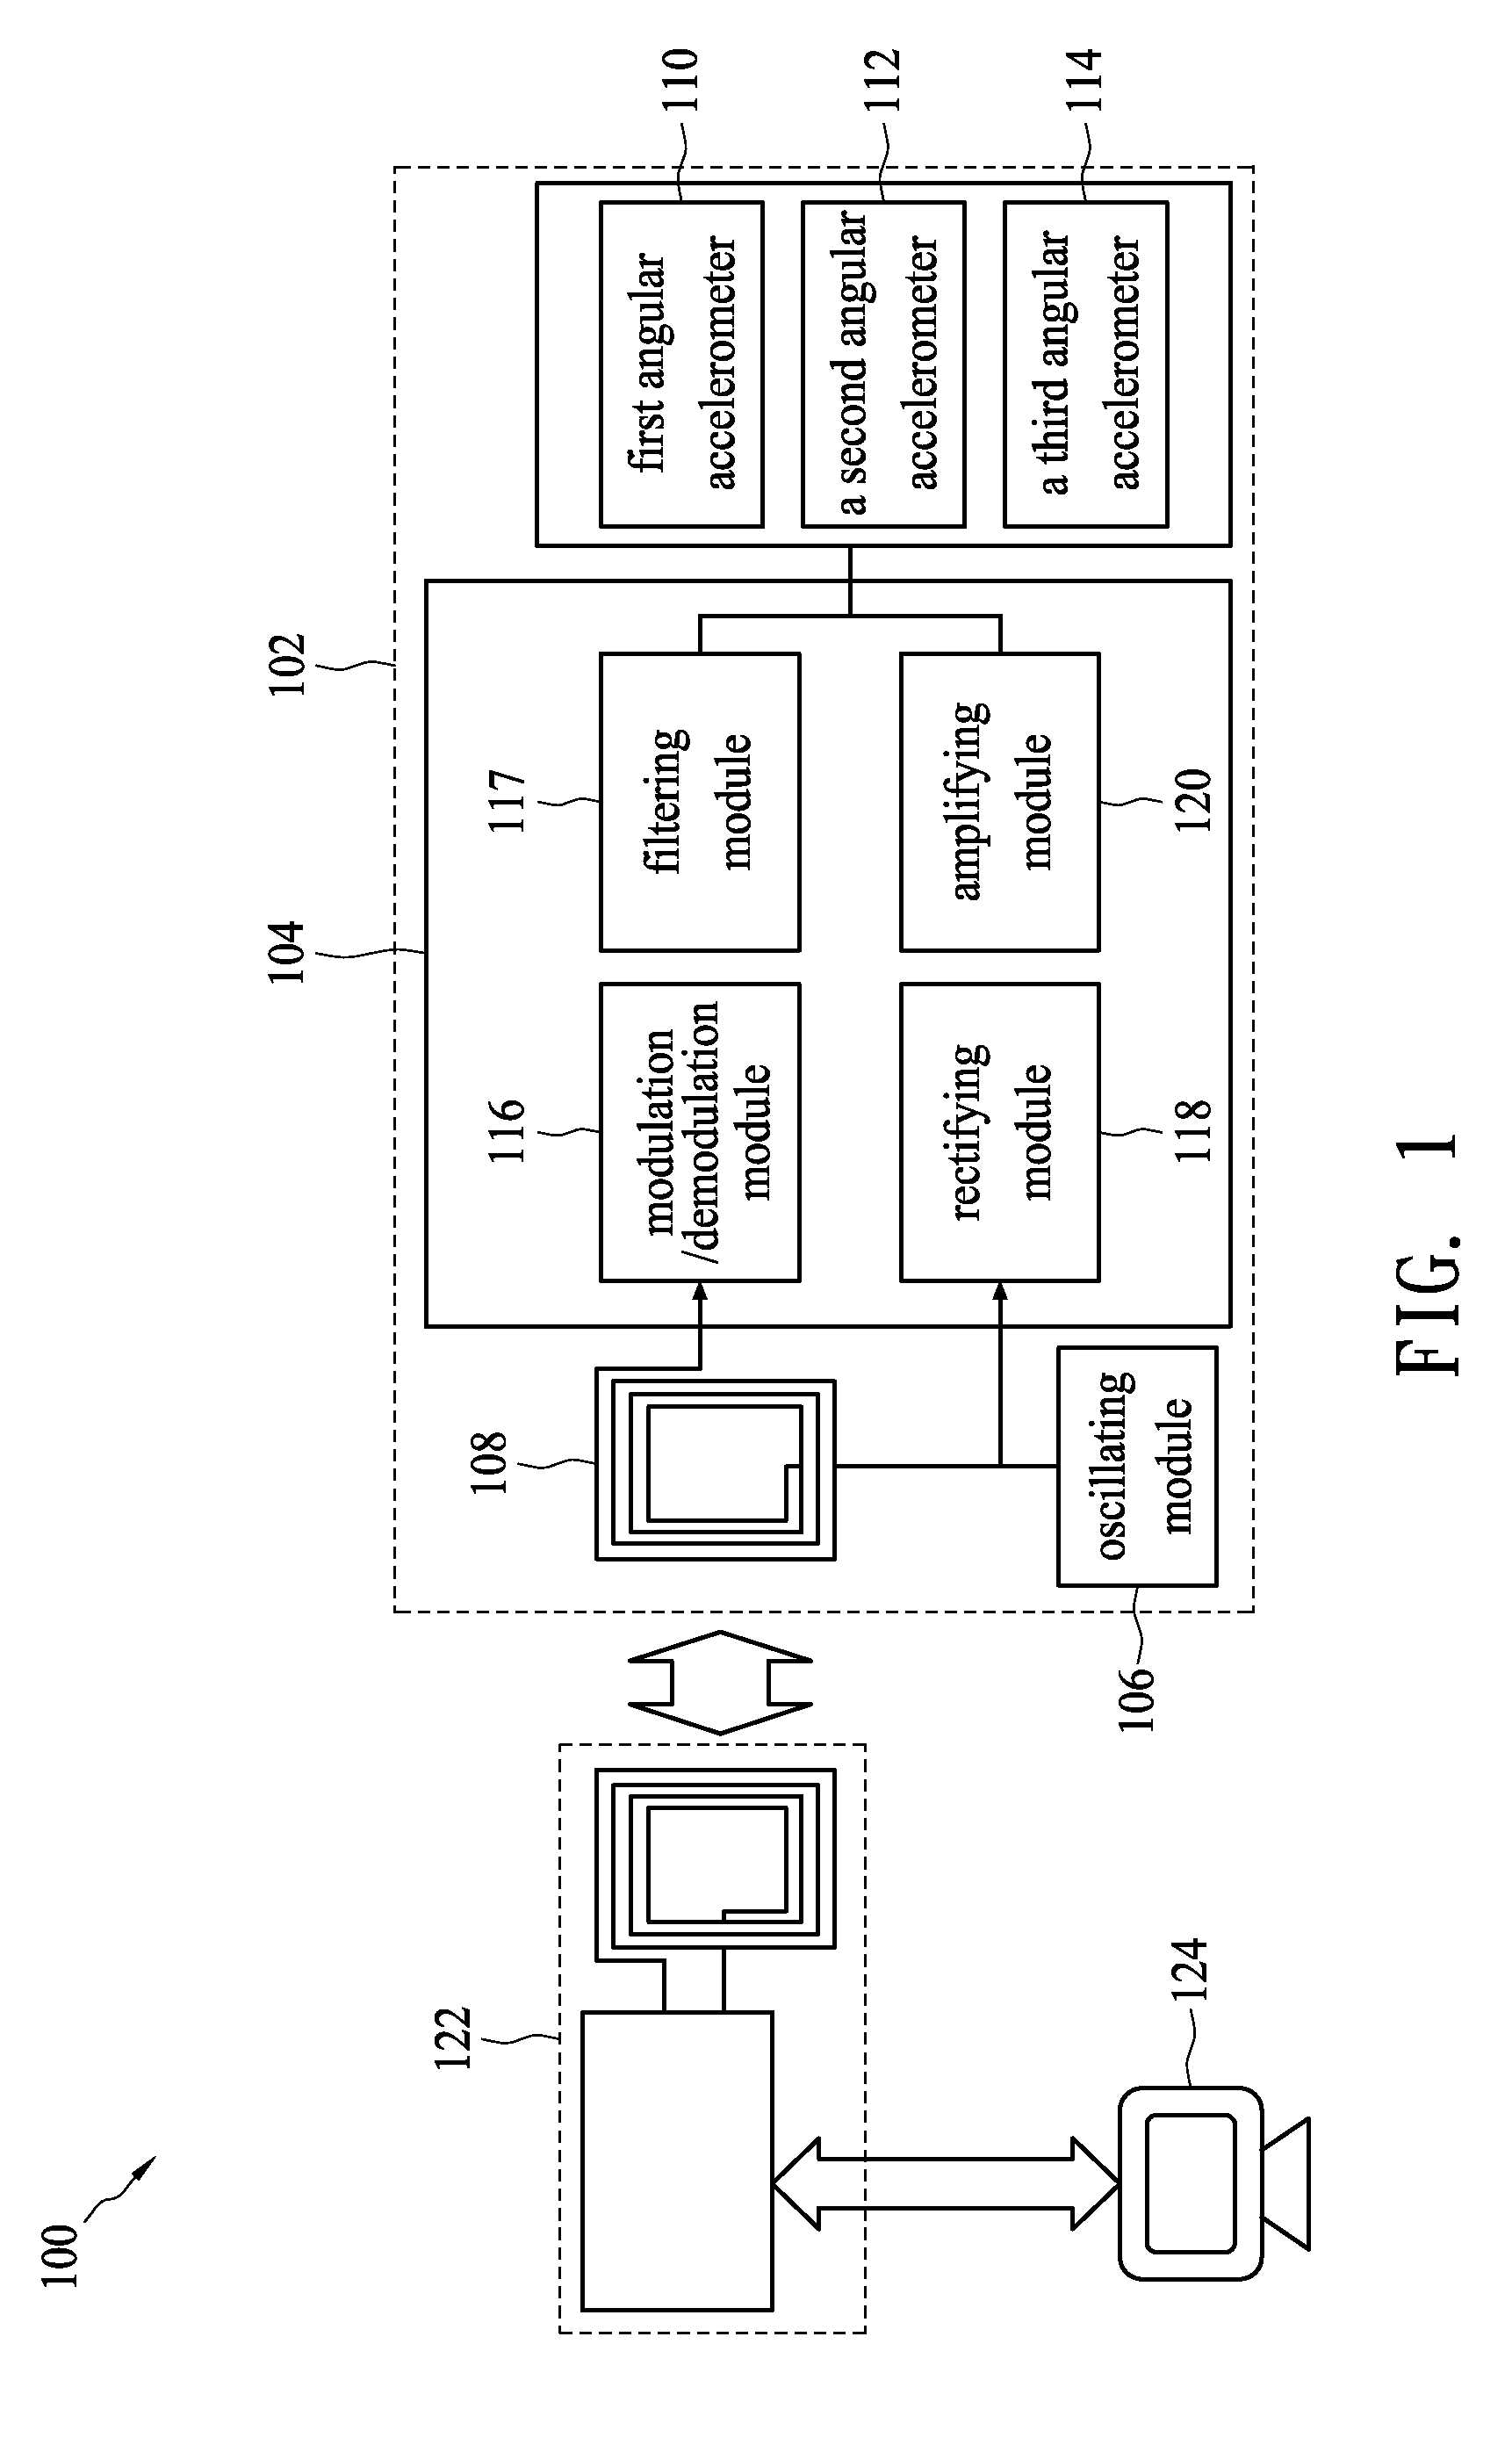 Thermal Bubble Type Angular Accelerometer